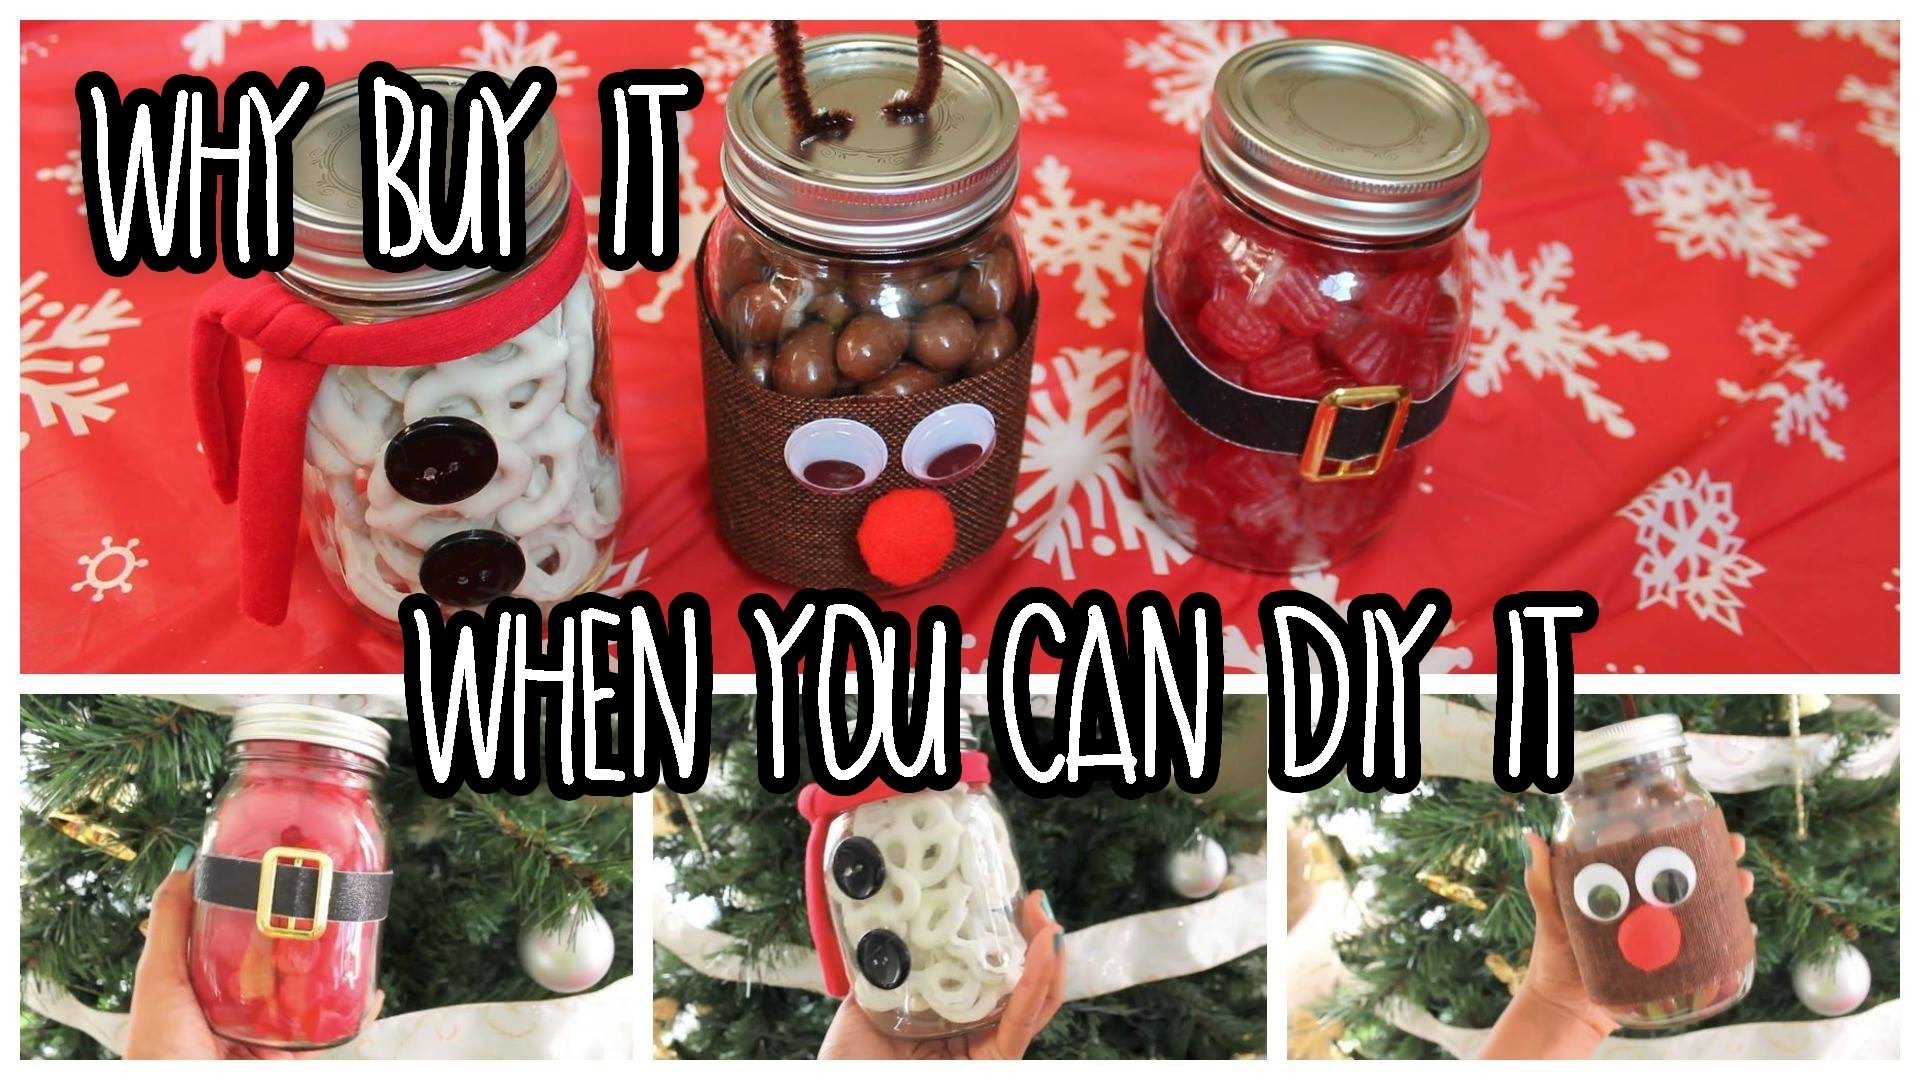 10 Perfect Gifts In A Jar Ideas For Christmas easy last minute diy christmas gifts using mason jars youtube 1 2022